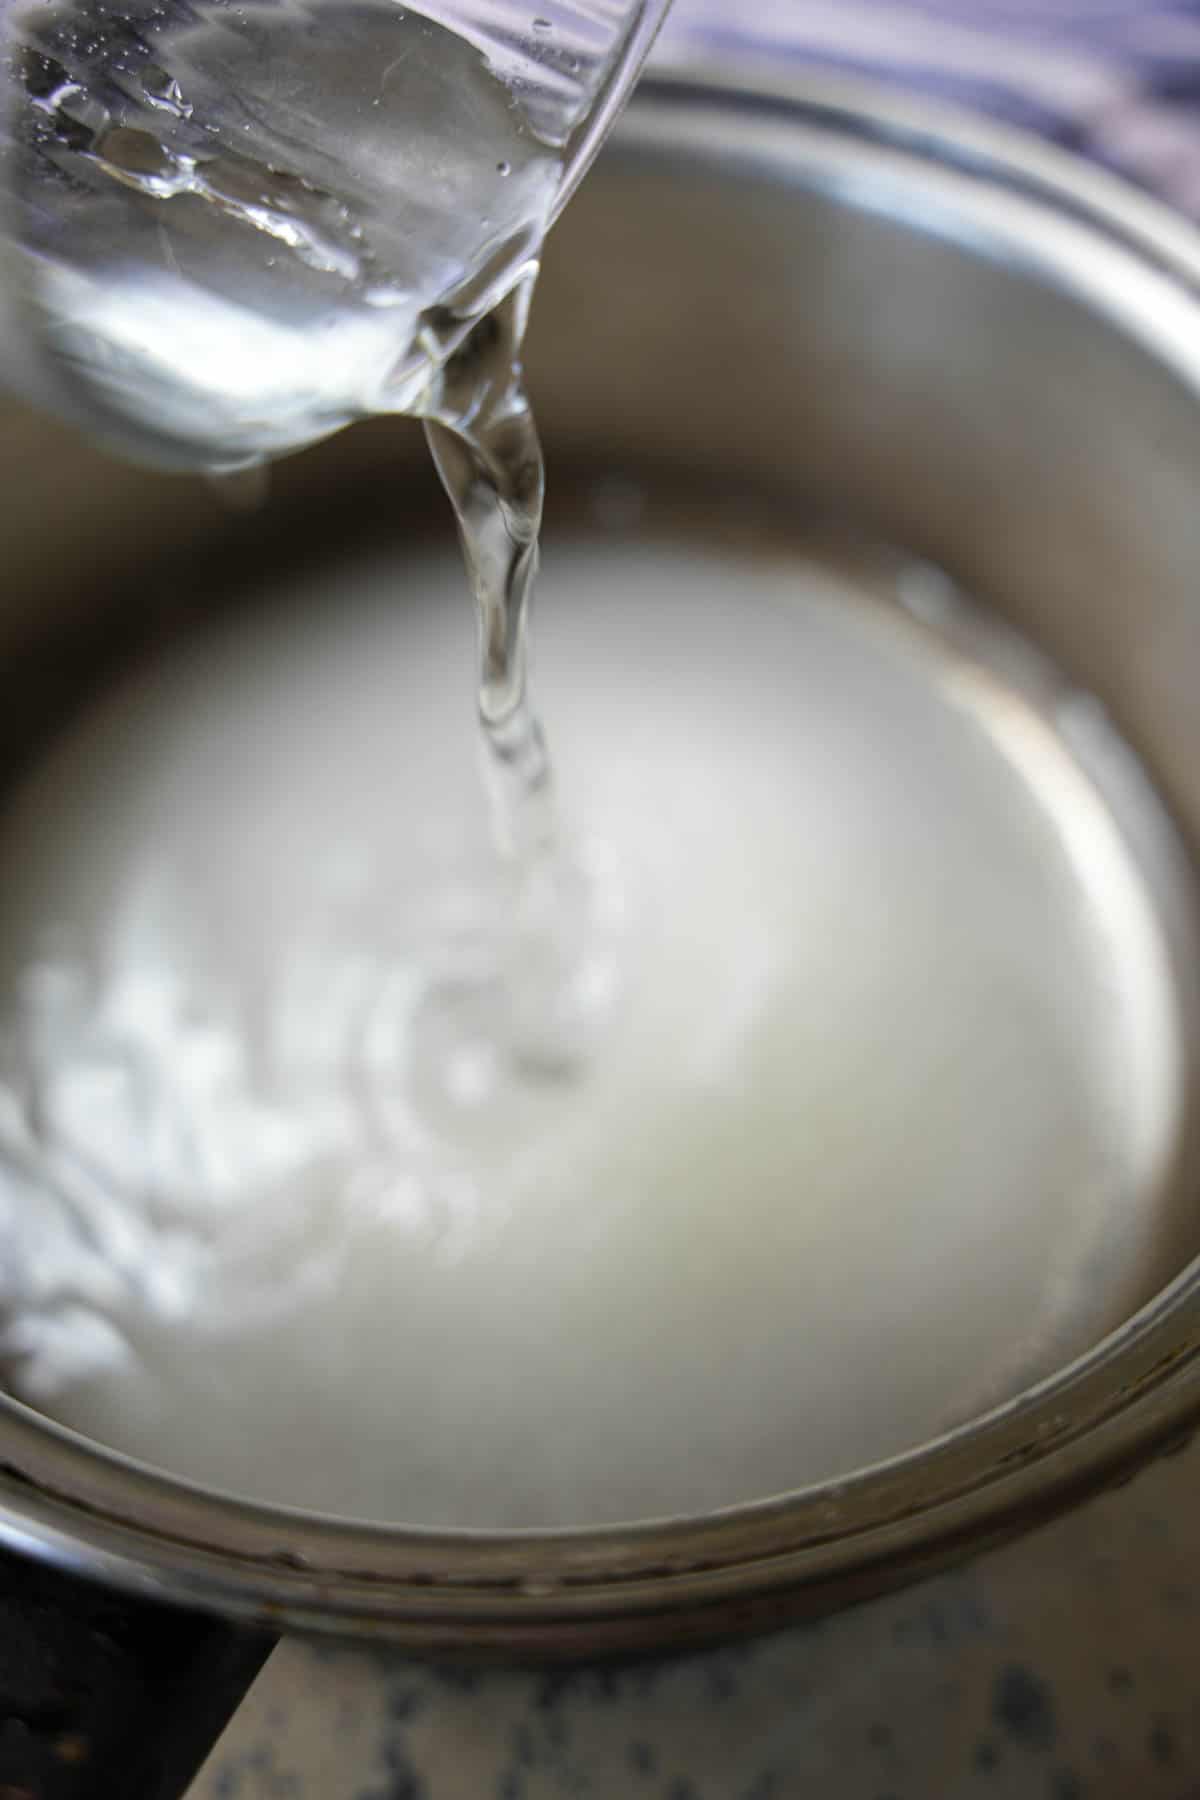 Water and sugar are mixed together to make the sugar syrup in a saucepan.